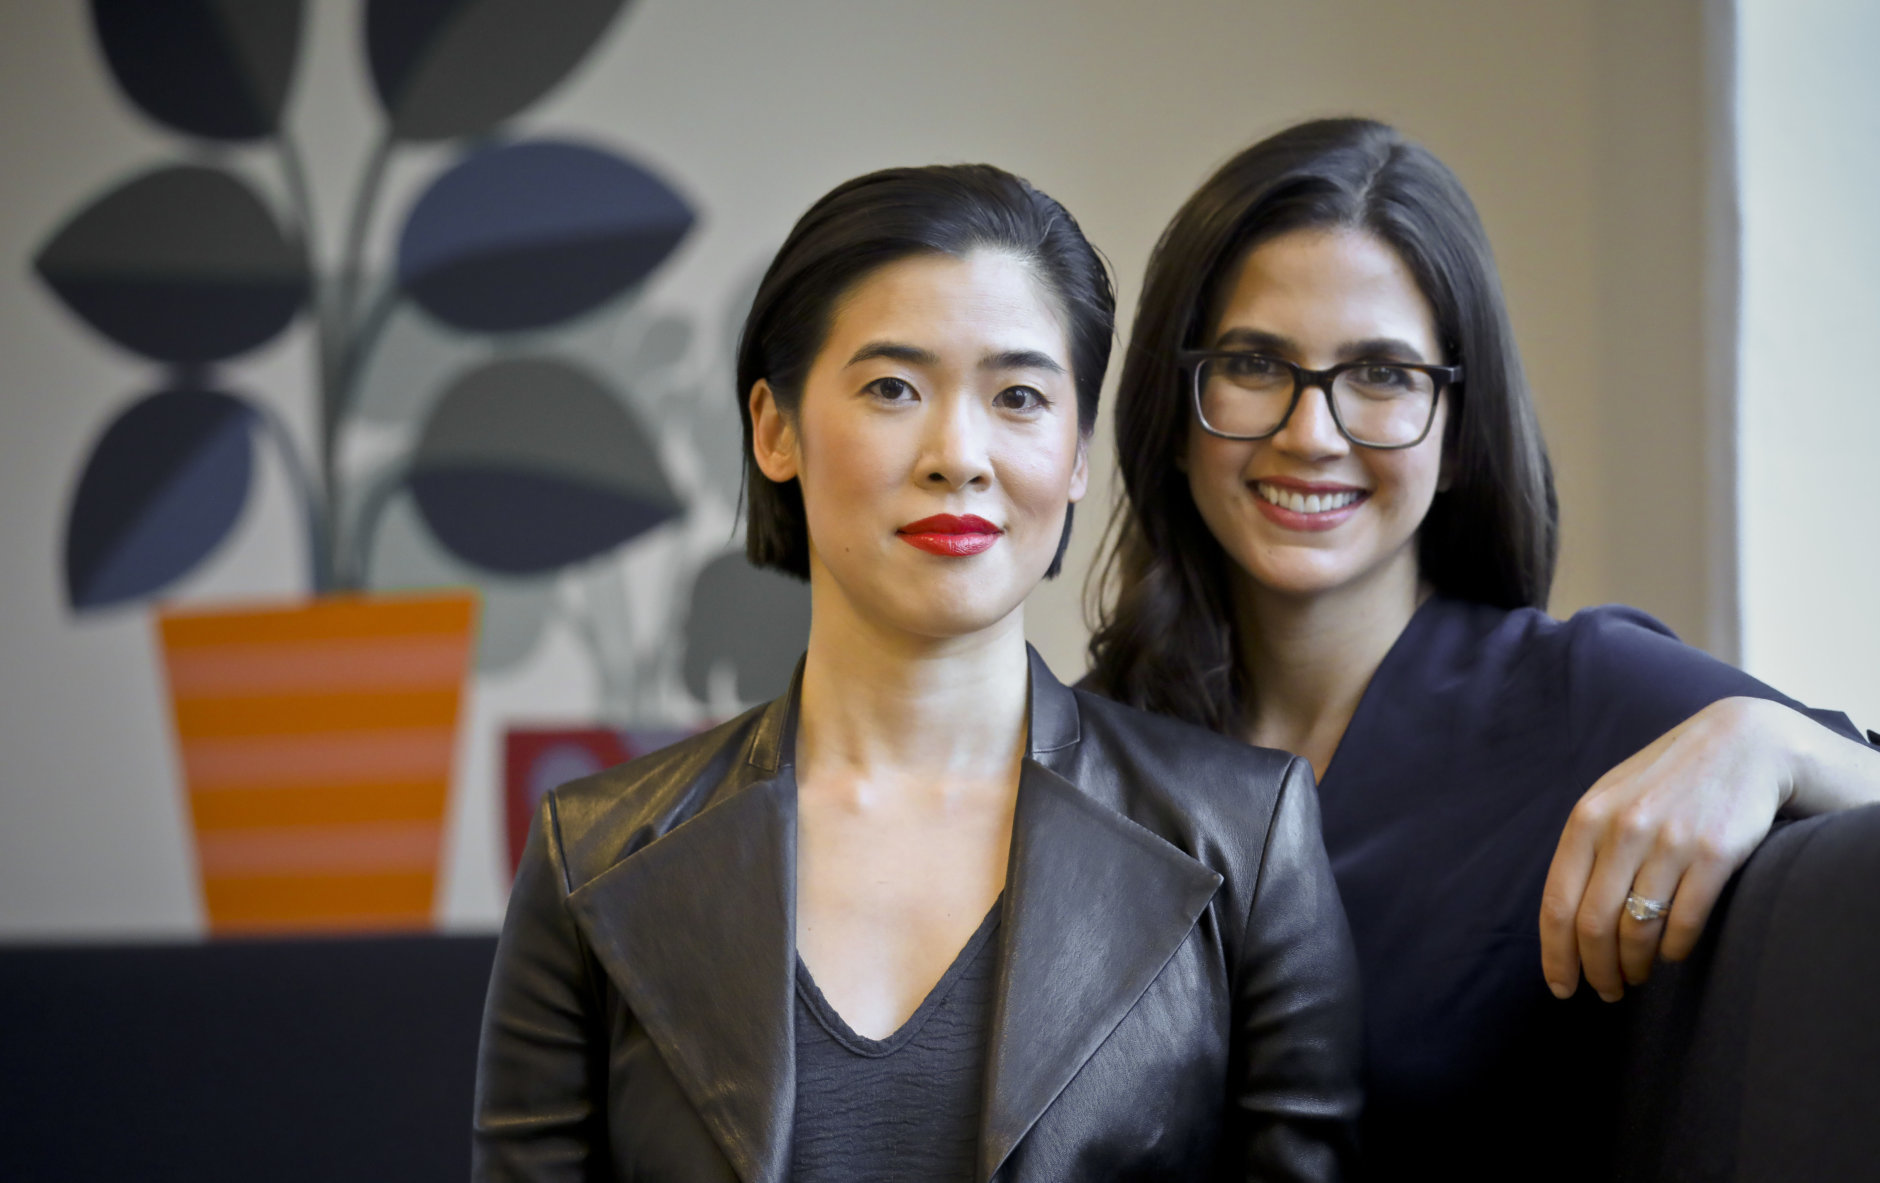 In this Thursday, Oct. 11, 2018, photo Brittania Boey, left, and Allie Melnick, right, leaders behind Harry's new shaving and body care brand Flamingo pose for a photo in New York. The company behind men’s shaving brand Harry’s is launching Flamingo, a new direct-to-consumer hair removal and body care brand for women, that aims to make women less uncomfortable about shaving. (AP Photo/Bebeto Matthews)